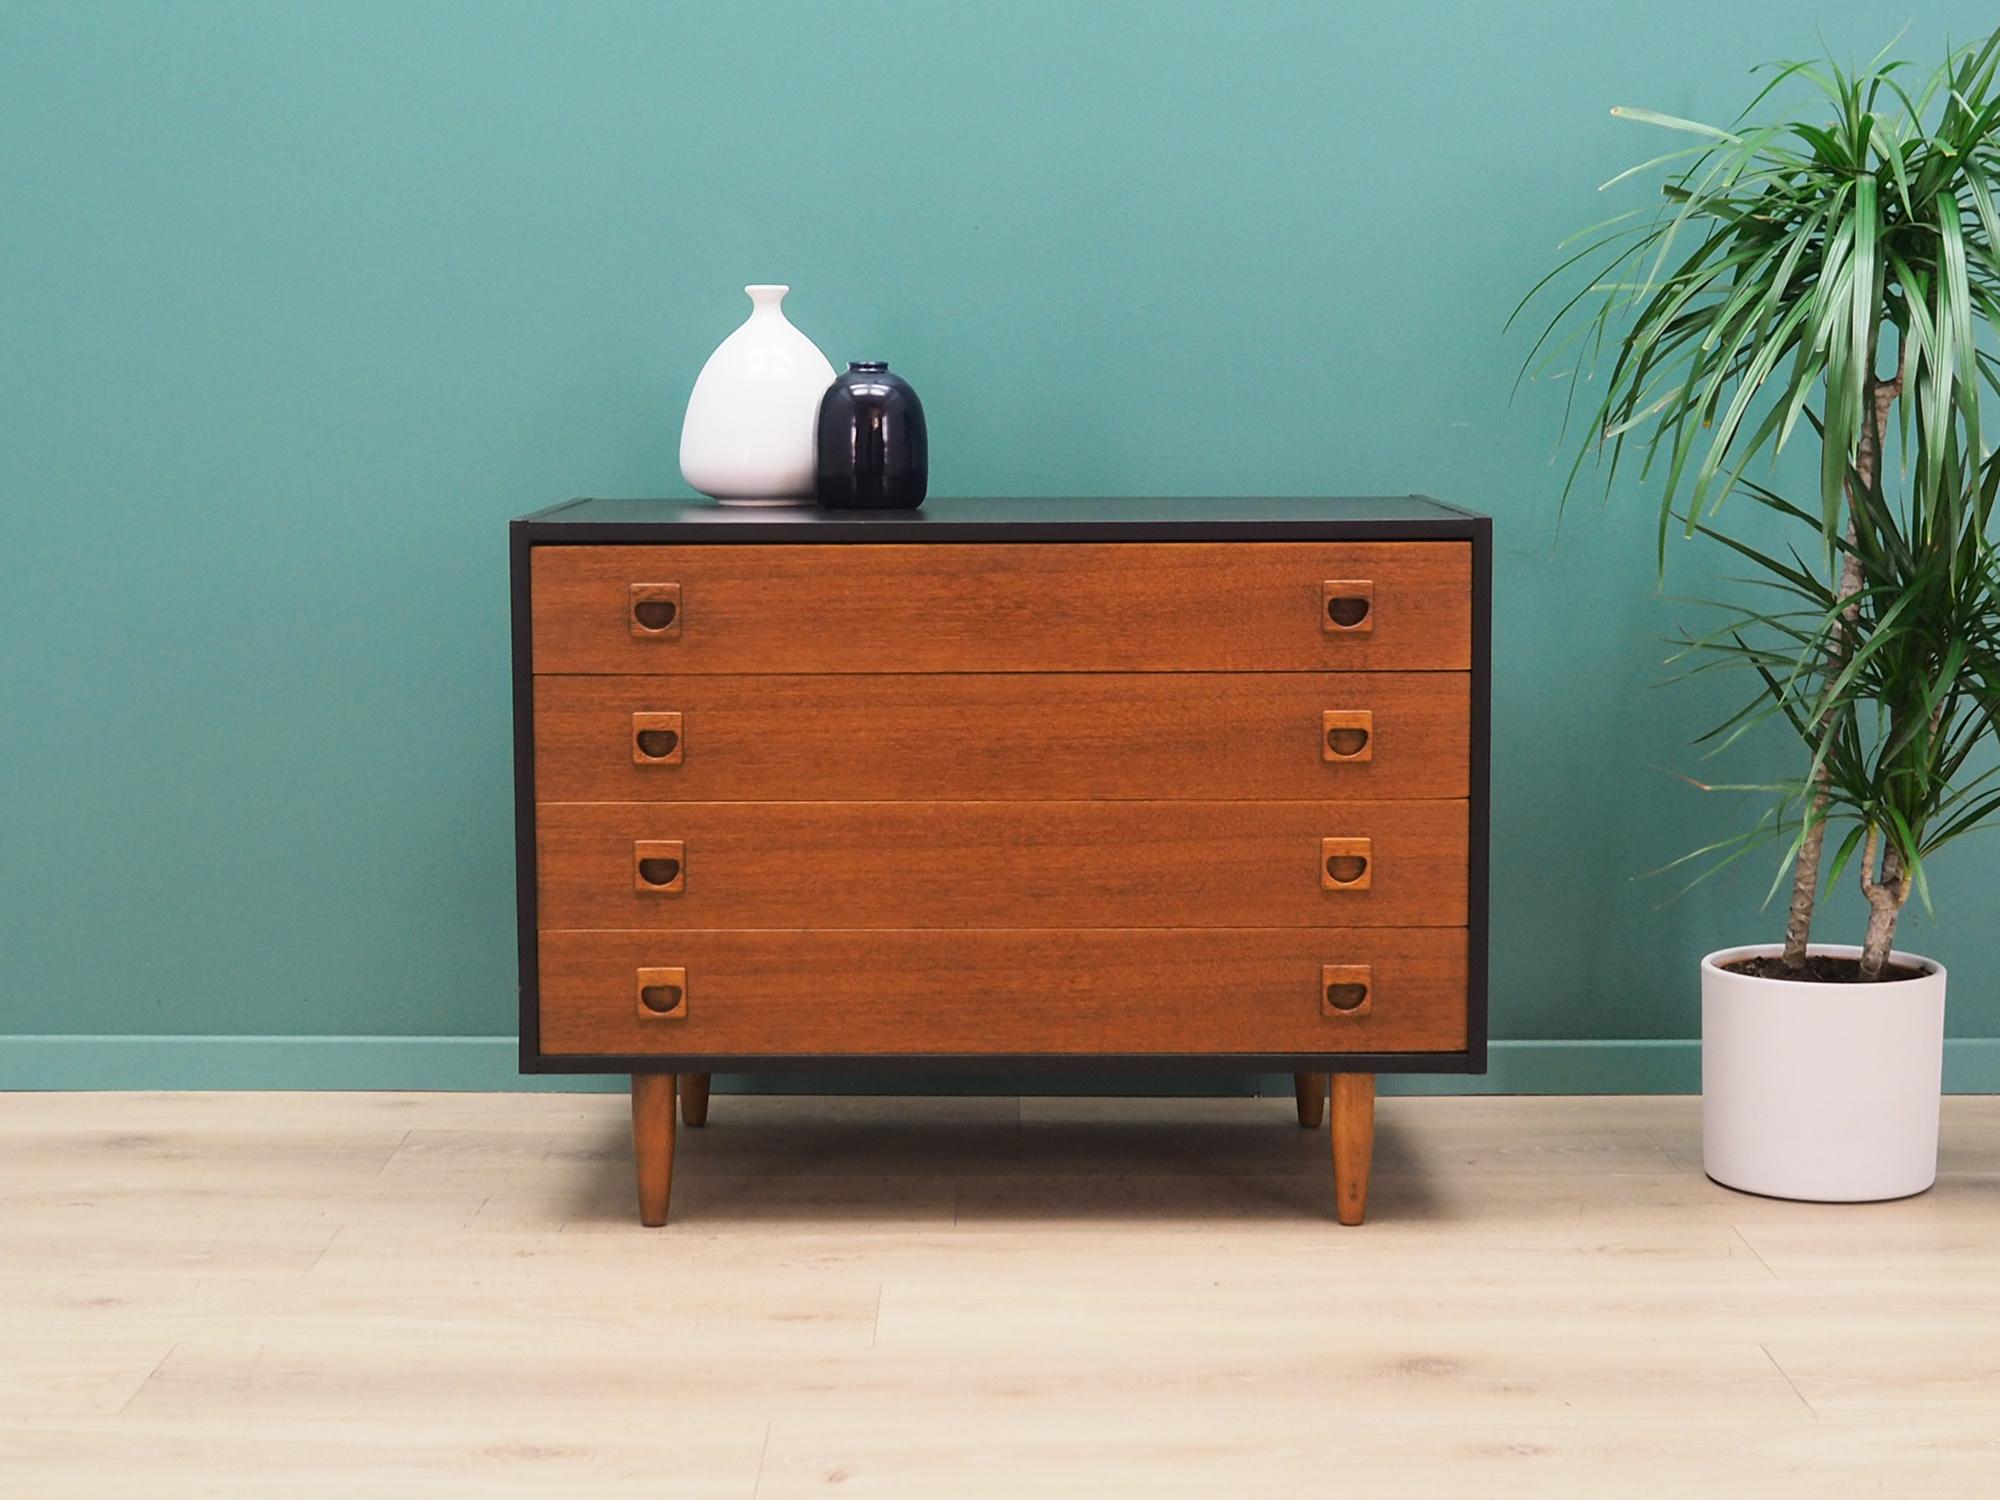 Chest of drawers was made in the 1970s, Danish production.

The construction is made of wood painted black. The legs and handles are made of solid teak wood. The surface after refreshing. The cabinet is a classic chest of drawers, ideal for any